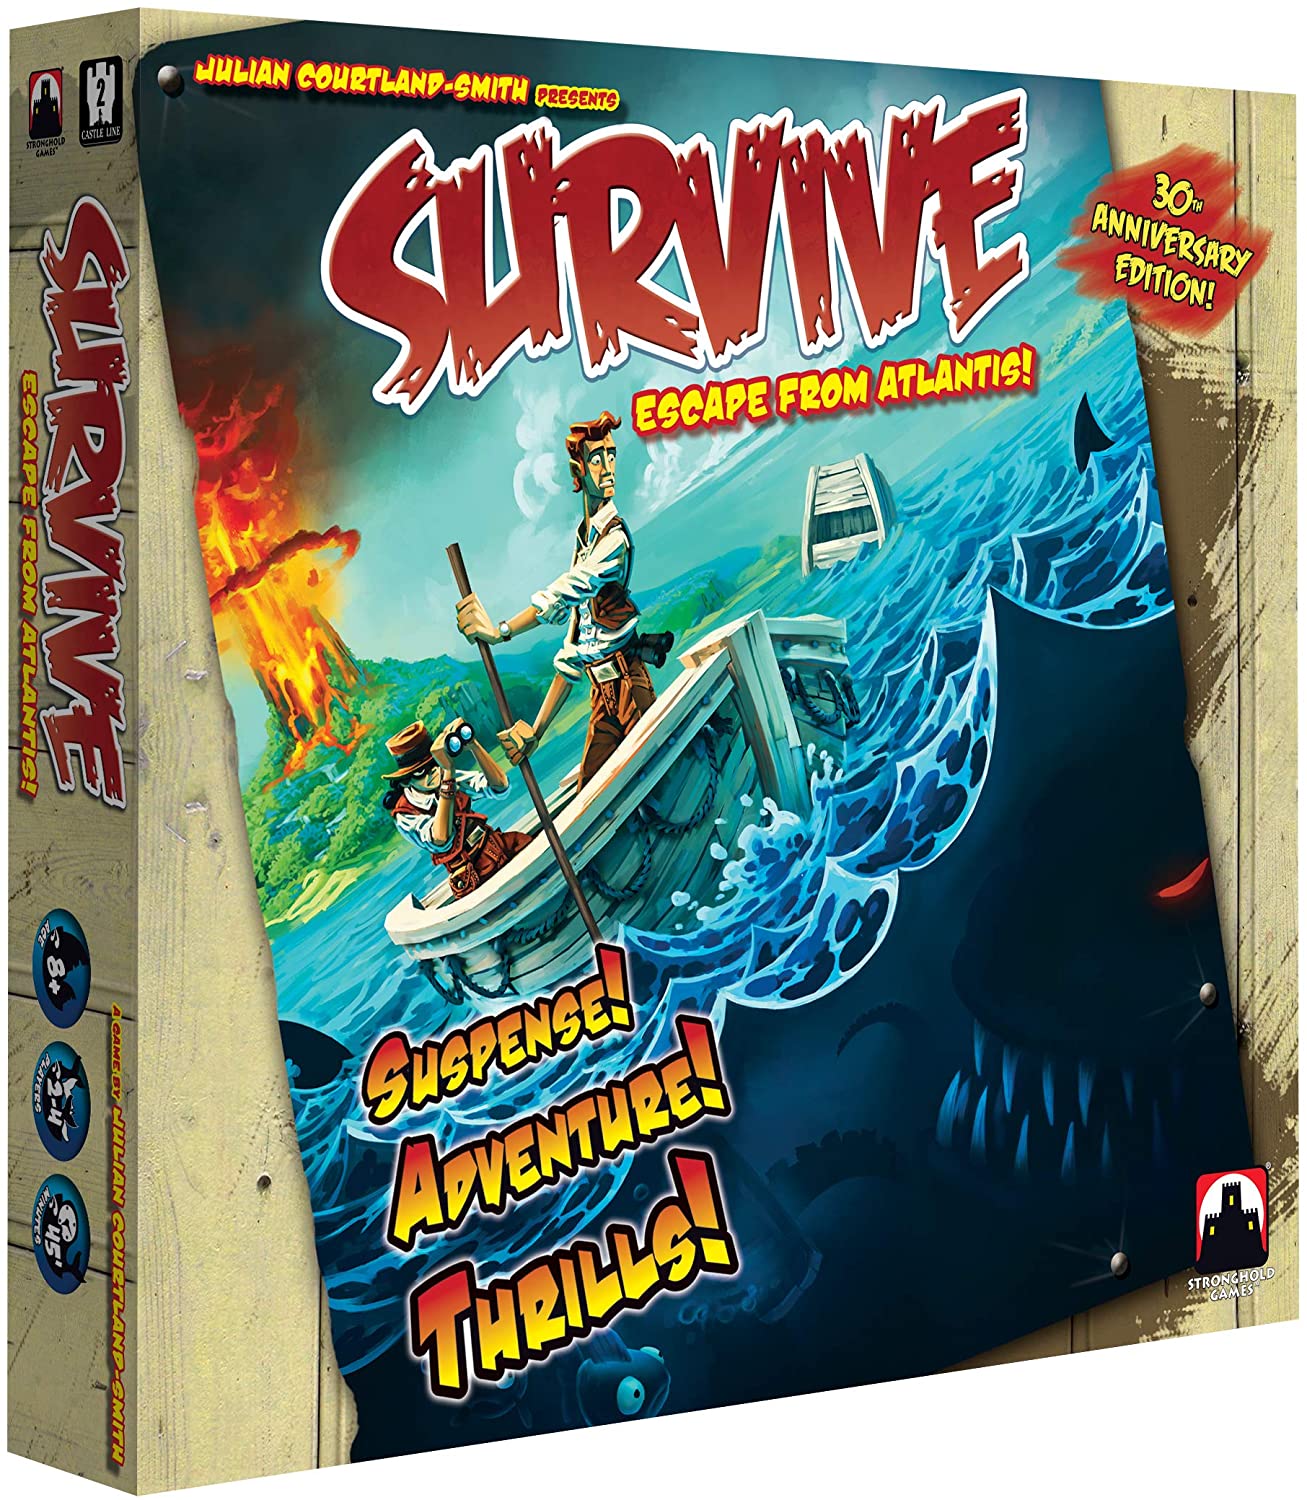 (BSG Certified USED) Survive: Escape from Atlantis - 30th Anniversary Edition